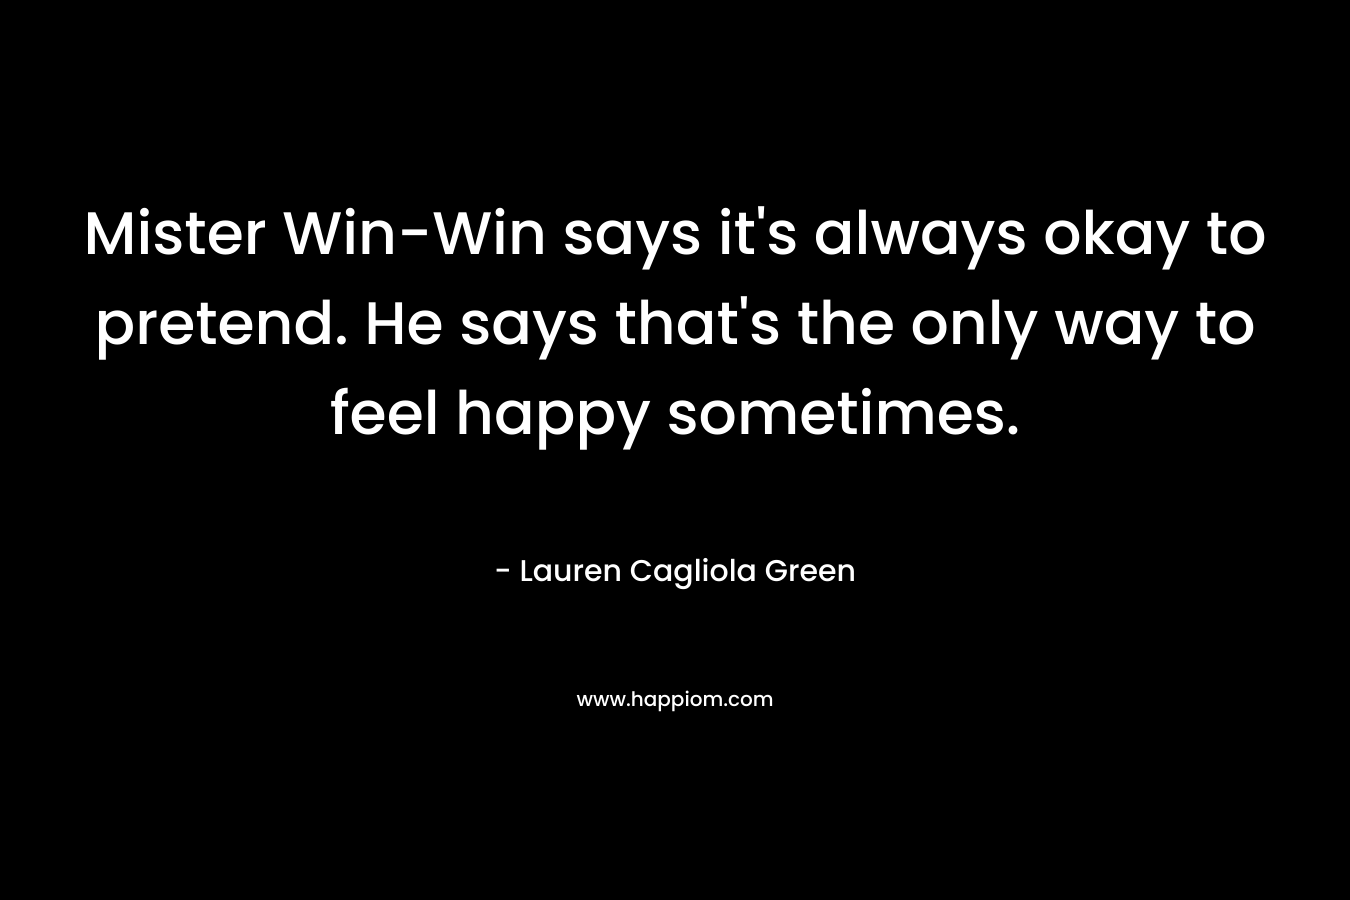 Mister Win-Win says it’s always okay to pretend. He says that’s the only way to feel happy sometimes. – Lauren Cagliola Green